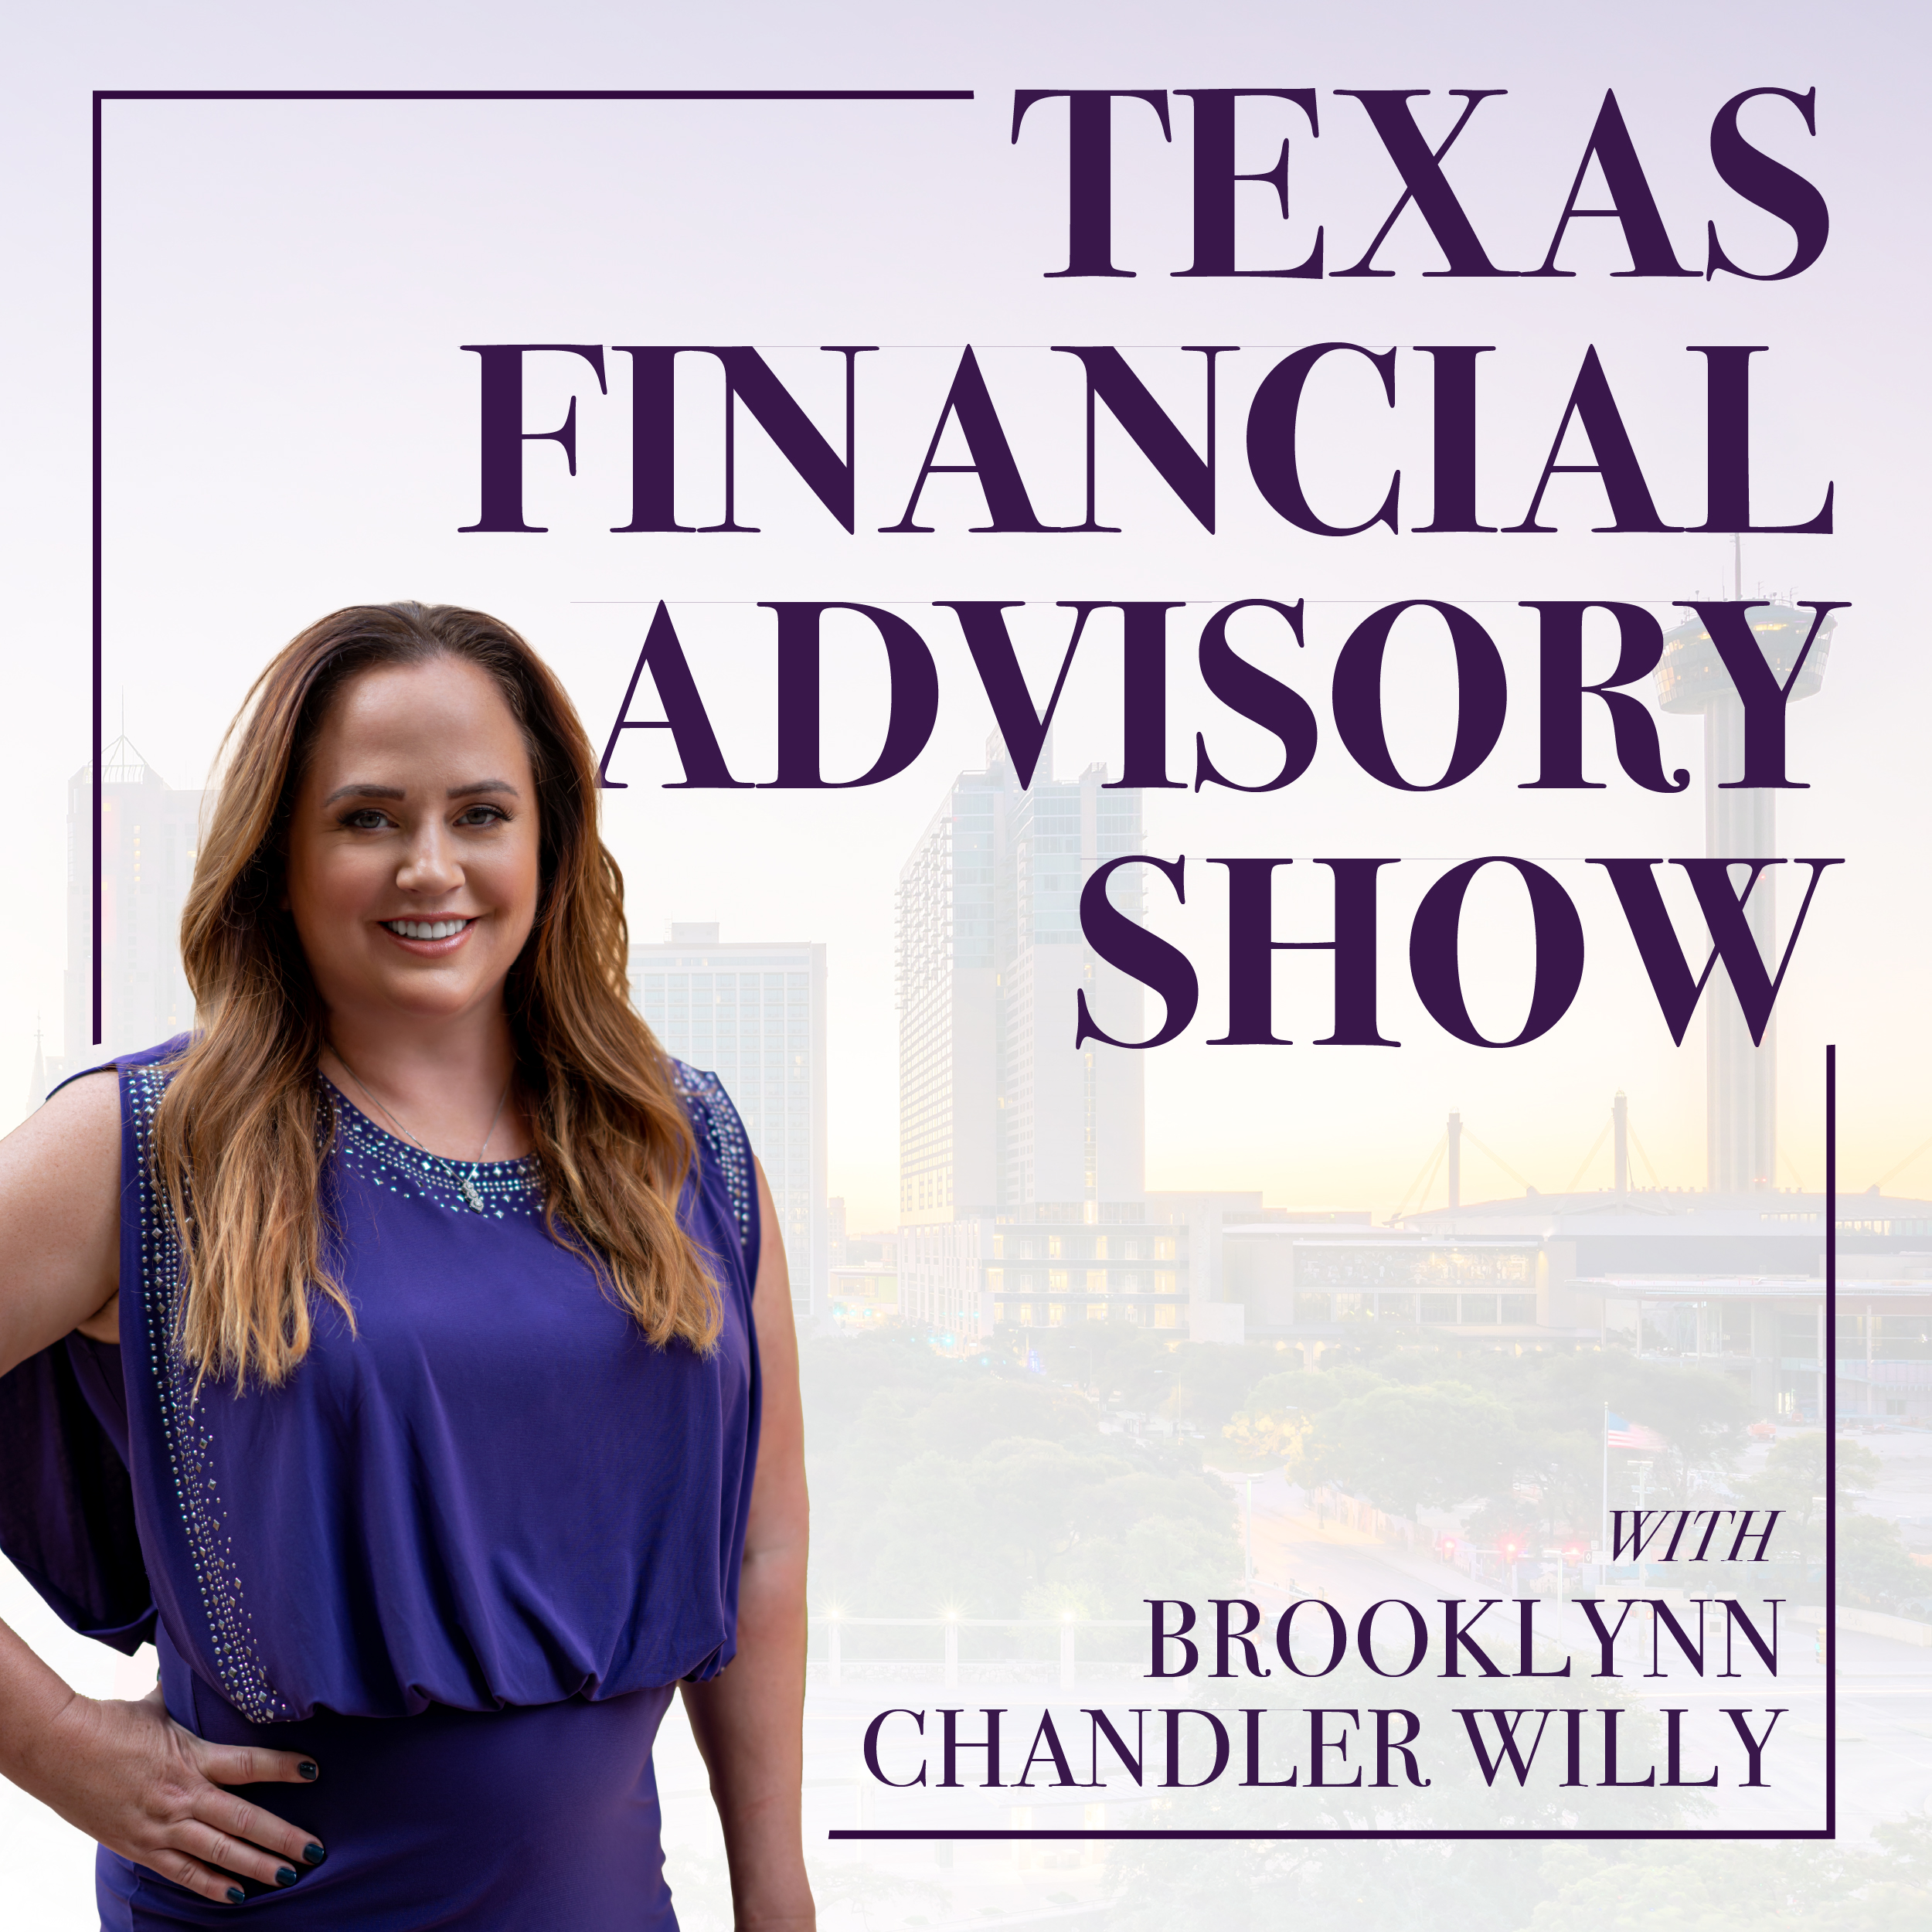 Texas Financial Advisory Group This week Brooklynn and her team discuss The 4 Tax Buckets and share some great client stories